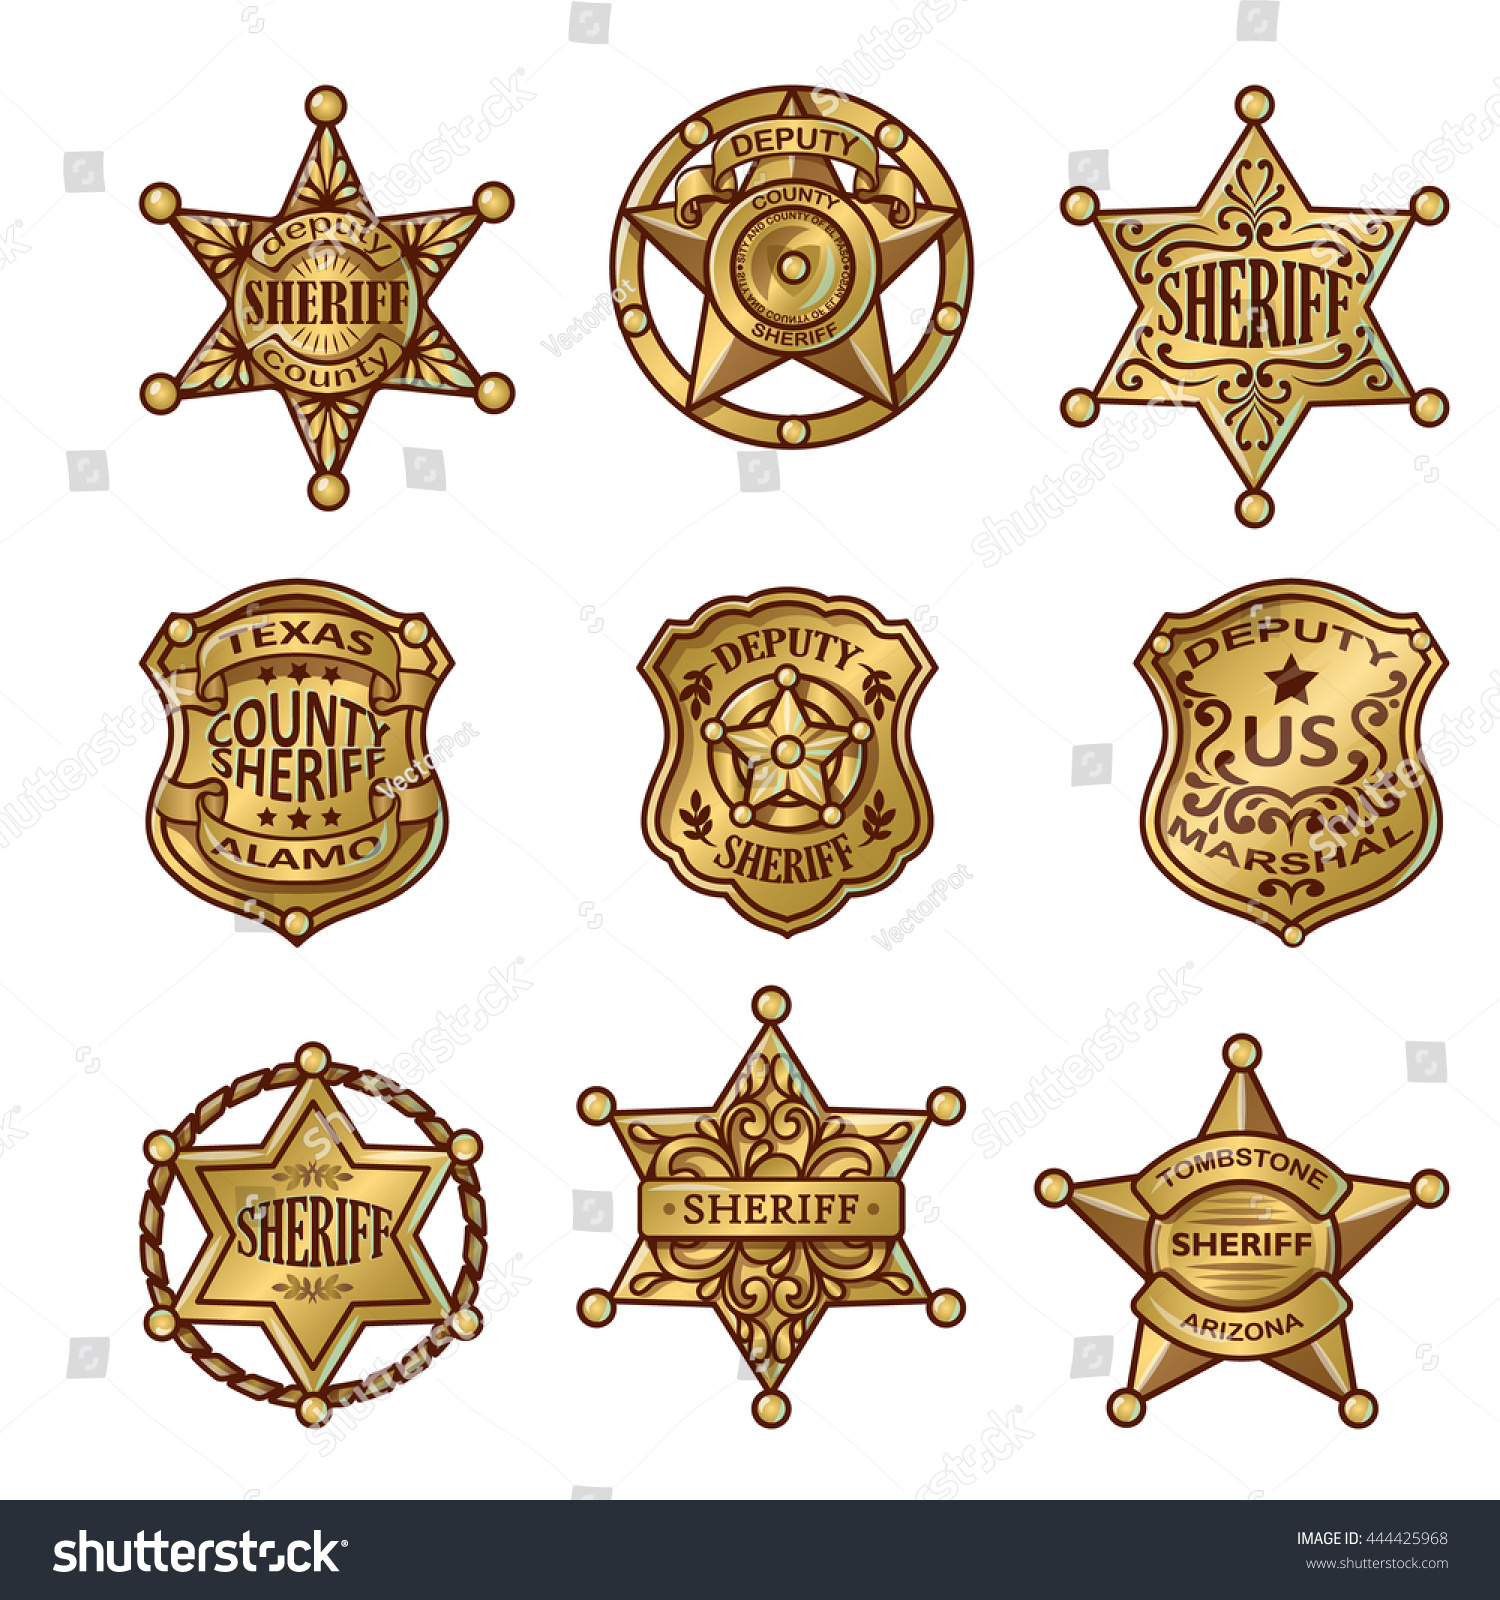 SVG of Golgen sheriff badges with stars and shields ribbons flourishes laurel on white background isolated vector illustration svg